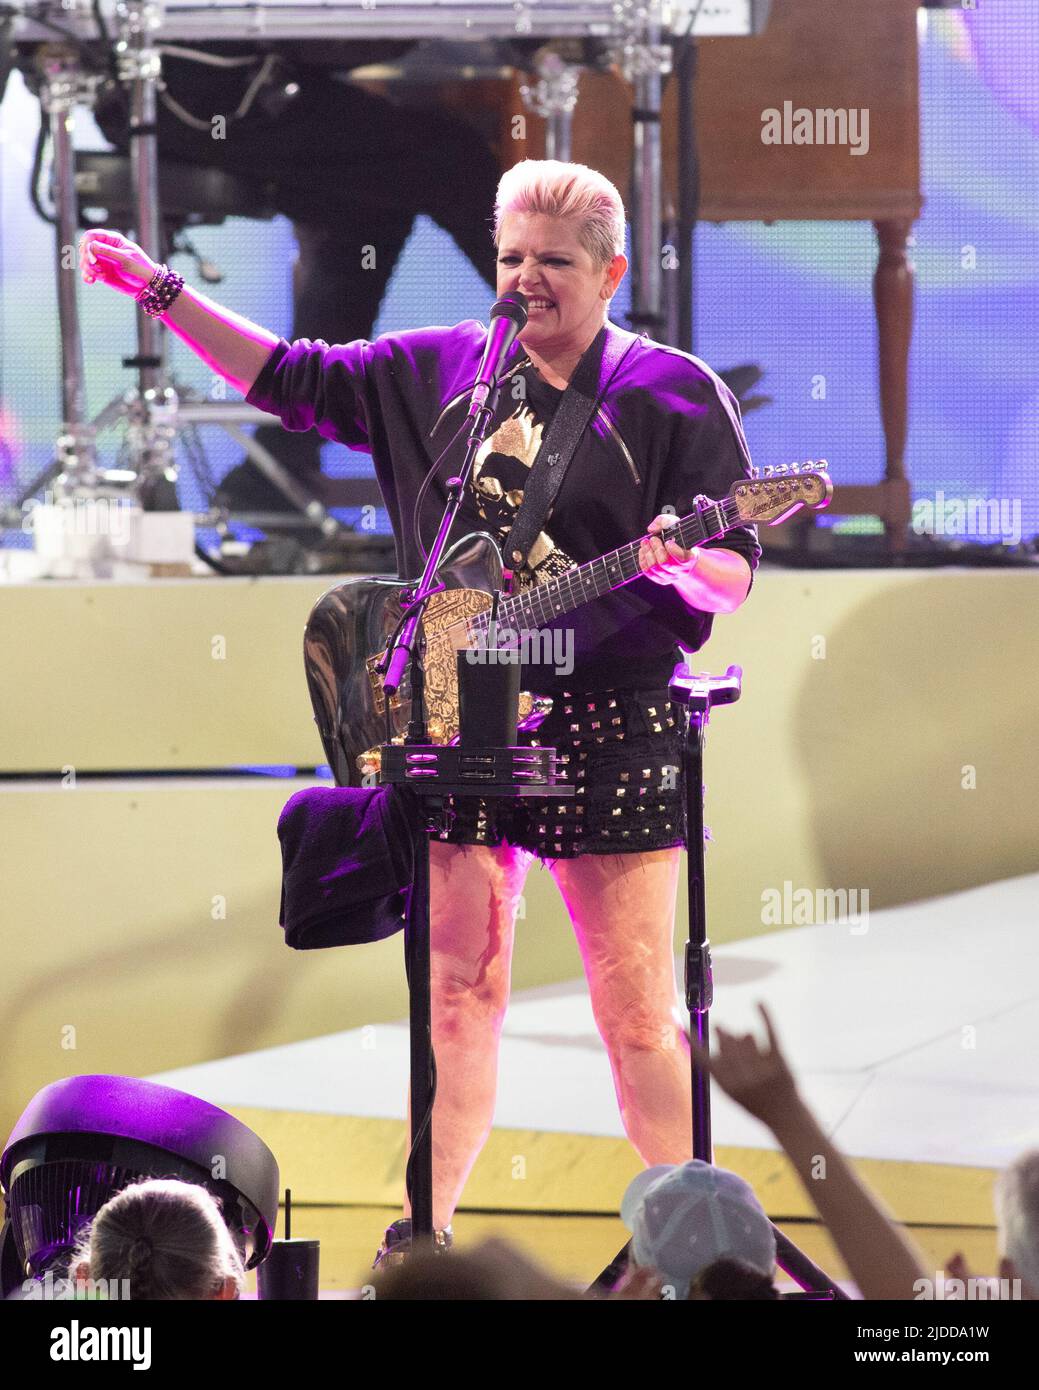 June 19 2022 Noblesville Indiana Usa Natalie Maines Of The Chicks Formerly The Dixie Chicks Played A Few Songs Before They Decided To End Their Show At Ruoff Music Center In Noblesville Indiana On June 19 2022 It Is Unclear Why They Ended The Show But The Lead Singer Mentioned She Was Feeling Unwell Credit Image Lora Olivezuma Press Wire 2JDDA1W 